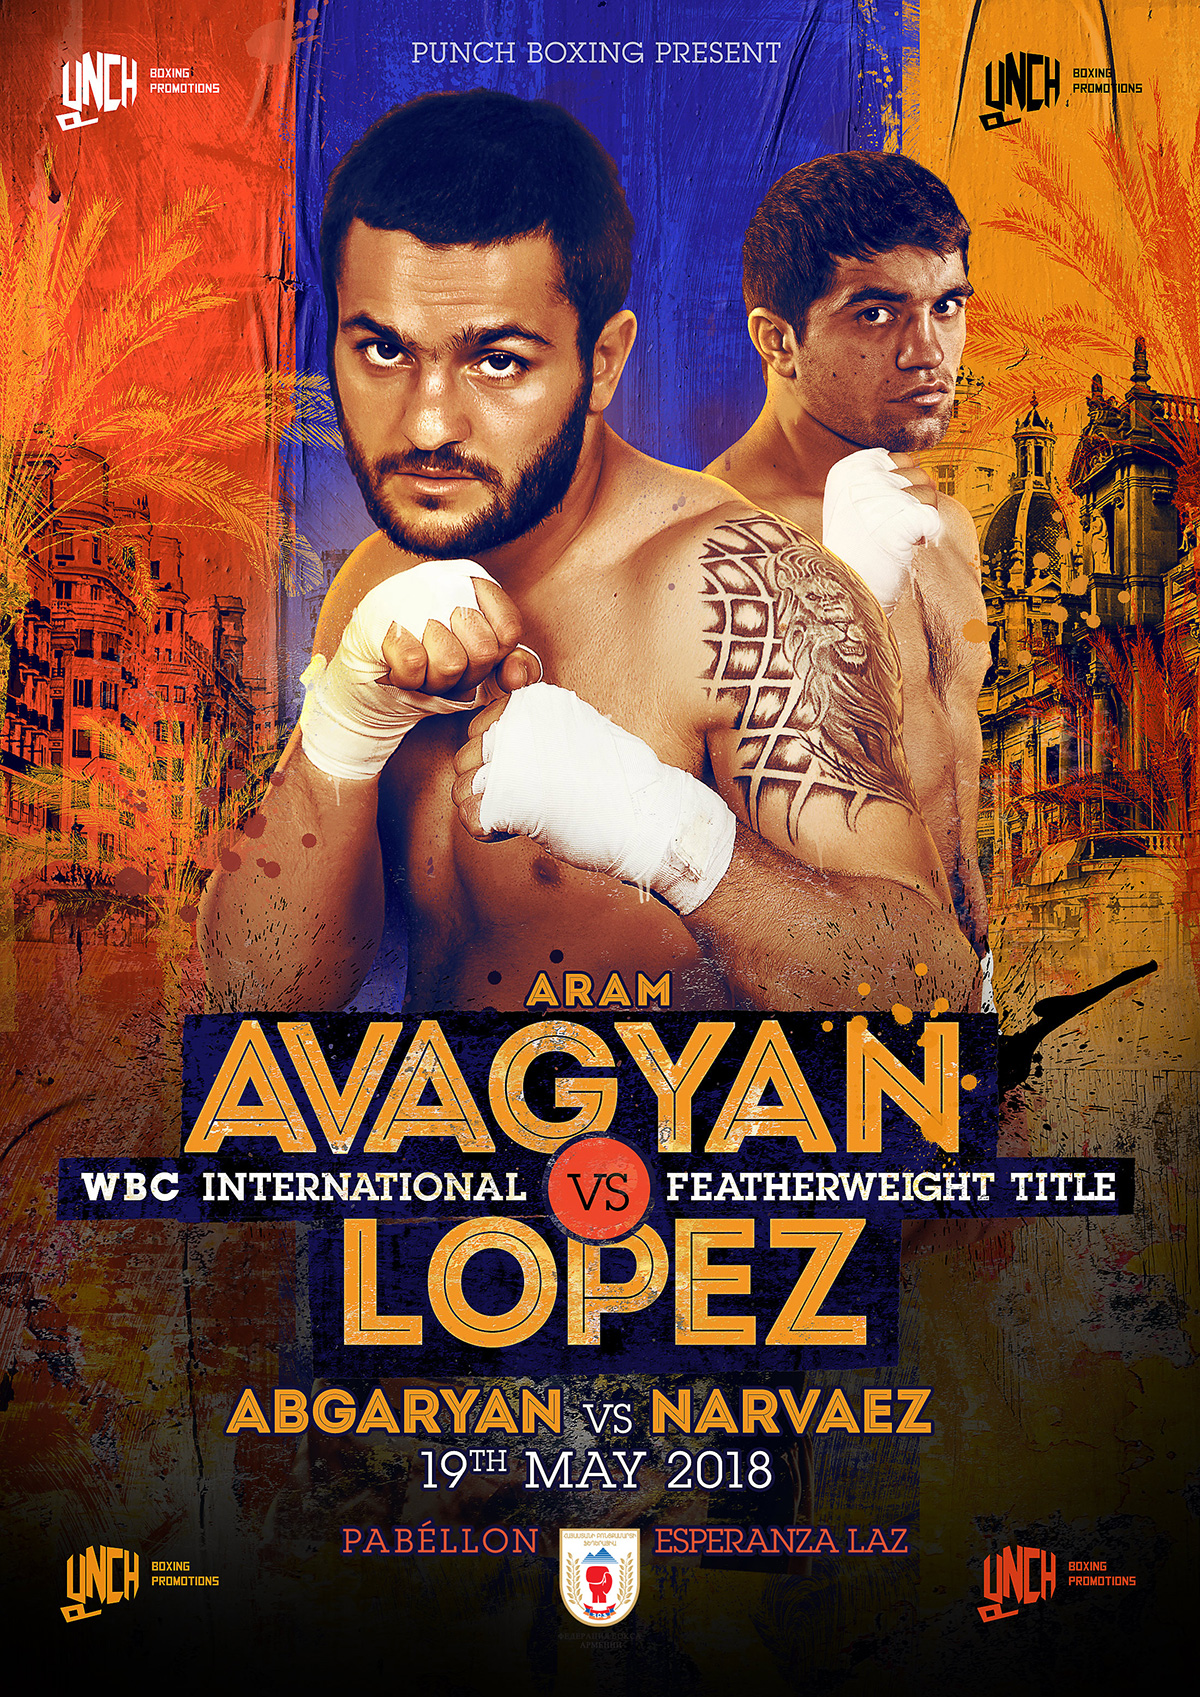 poster for a boxing fight in Valencia, Spain featuring Aram Avagyan and Emmanuel Lopez